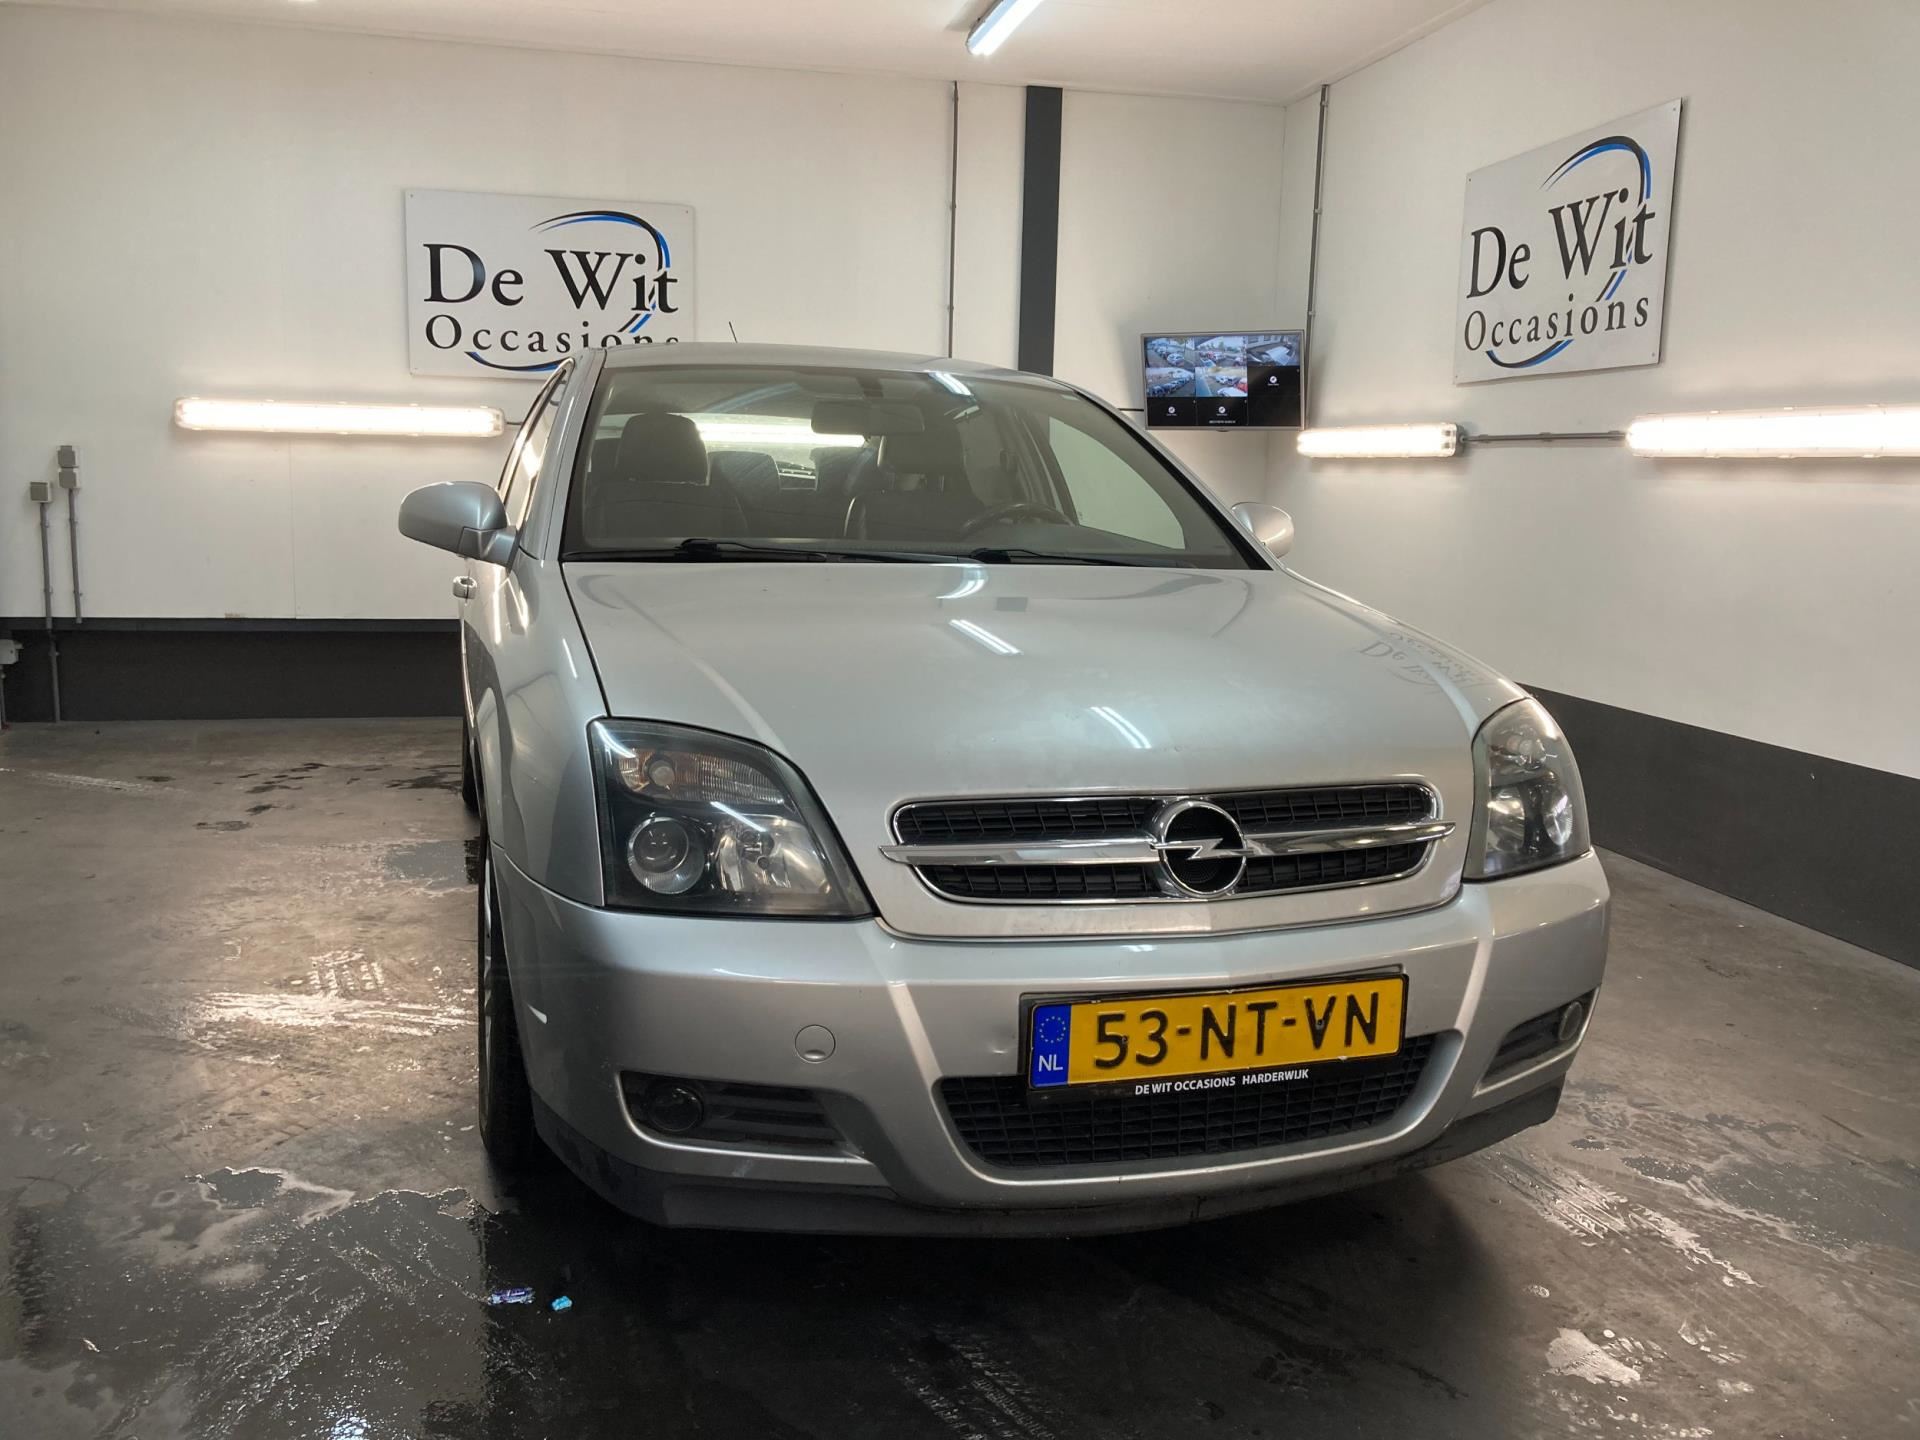 Opel Vectra GTS occasion - De Wit Occasions